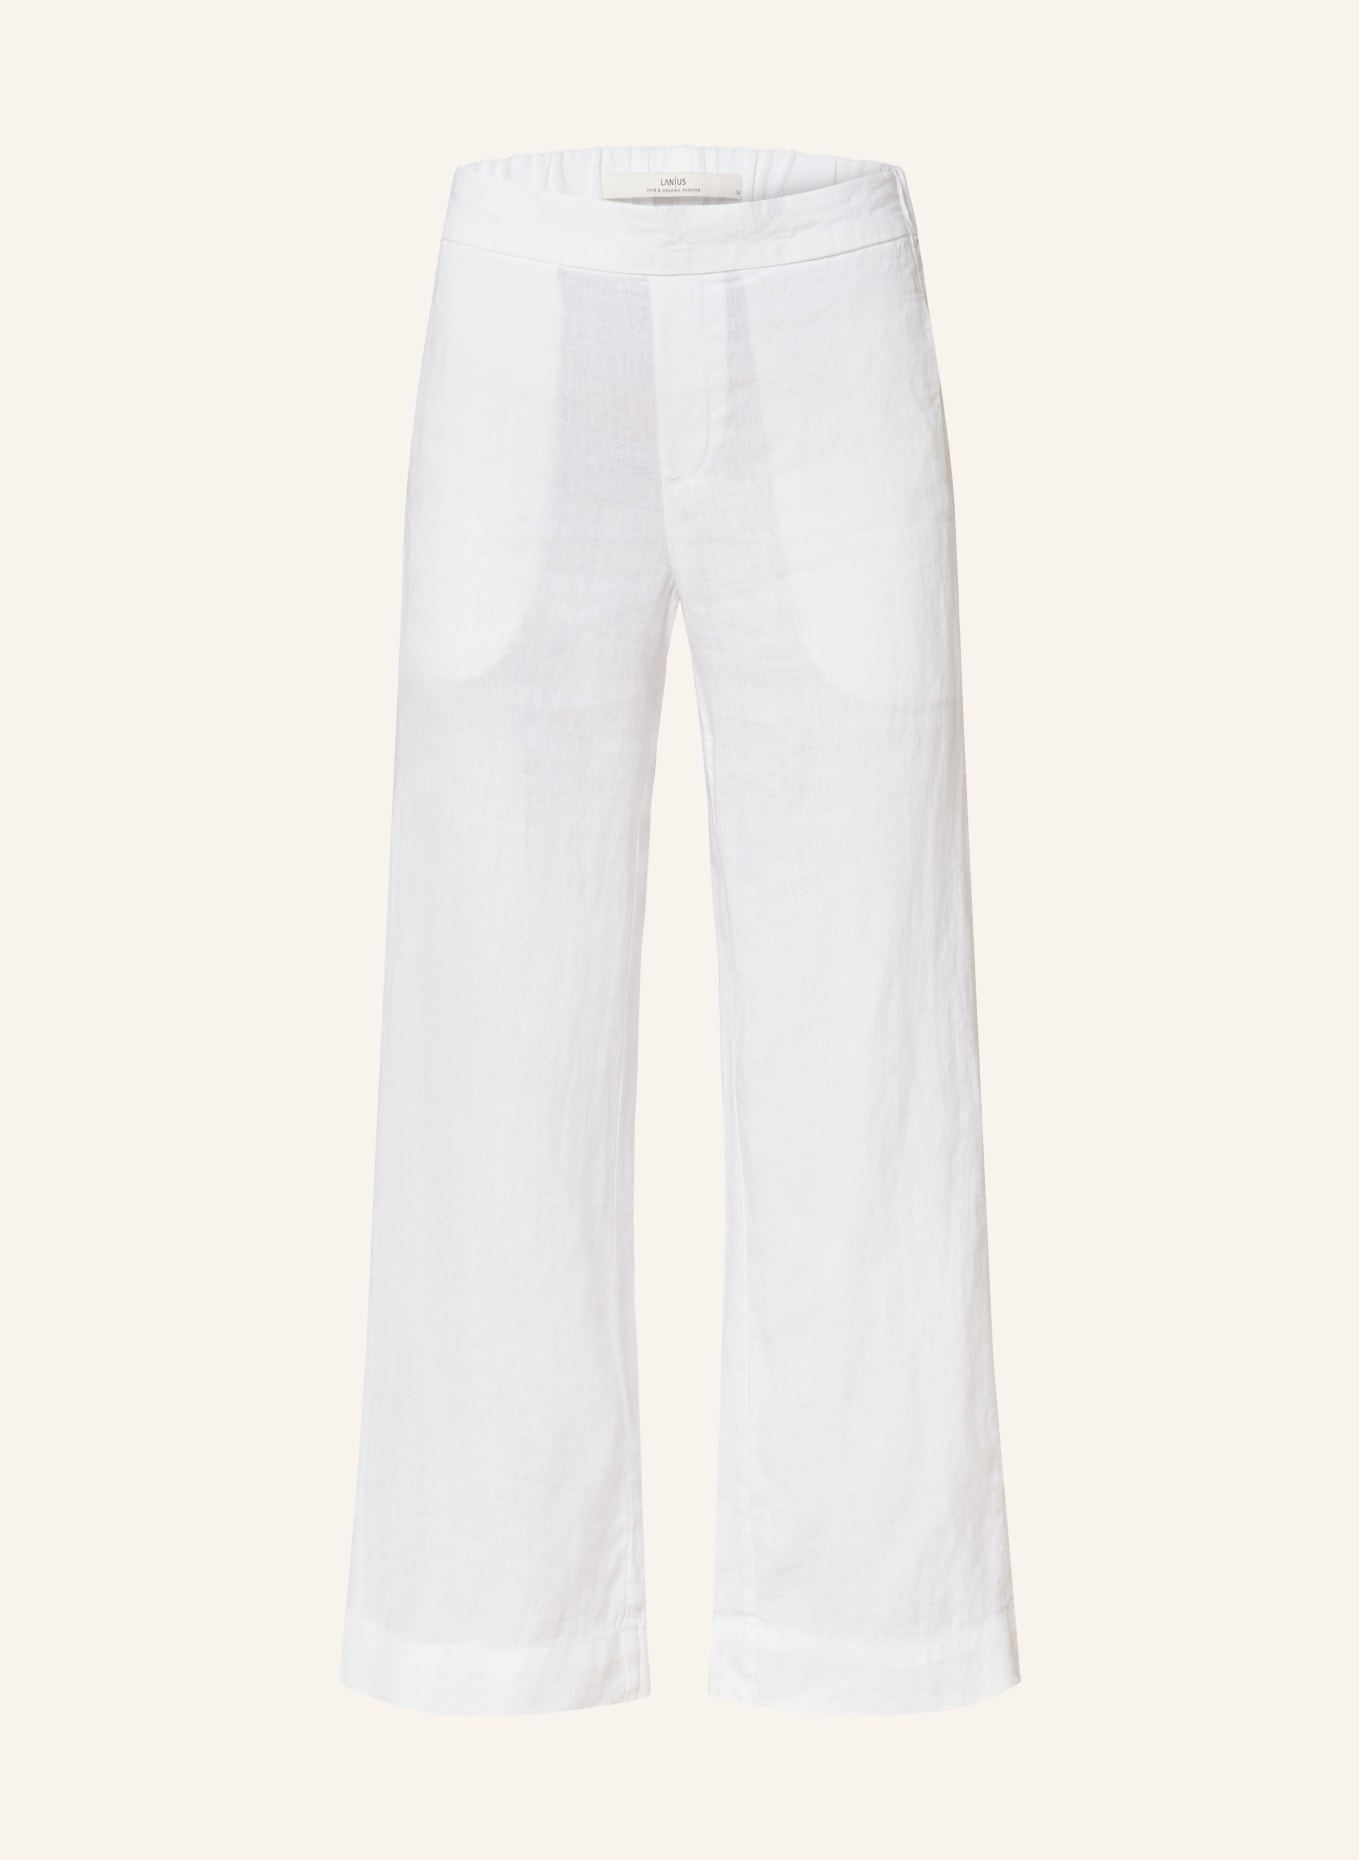 LANIUS 7/8 pants made of linen, Color: WHITE (Image 1)